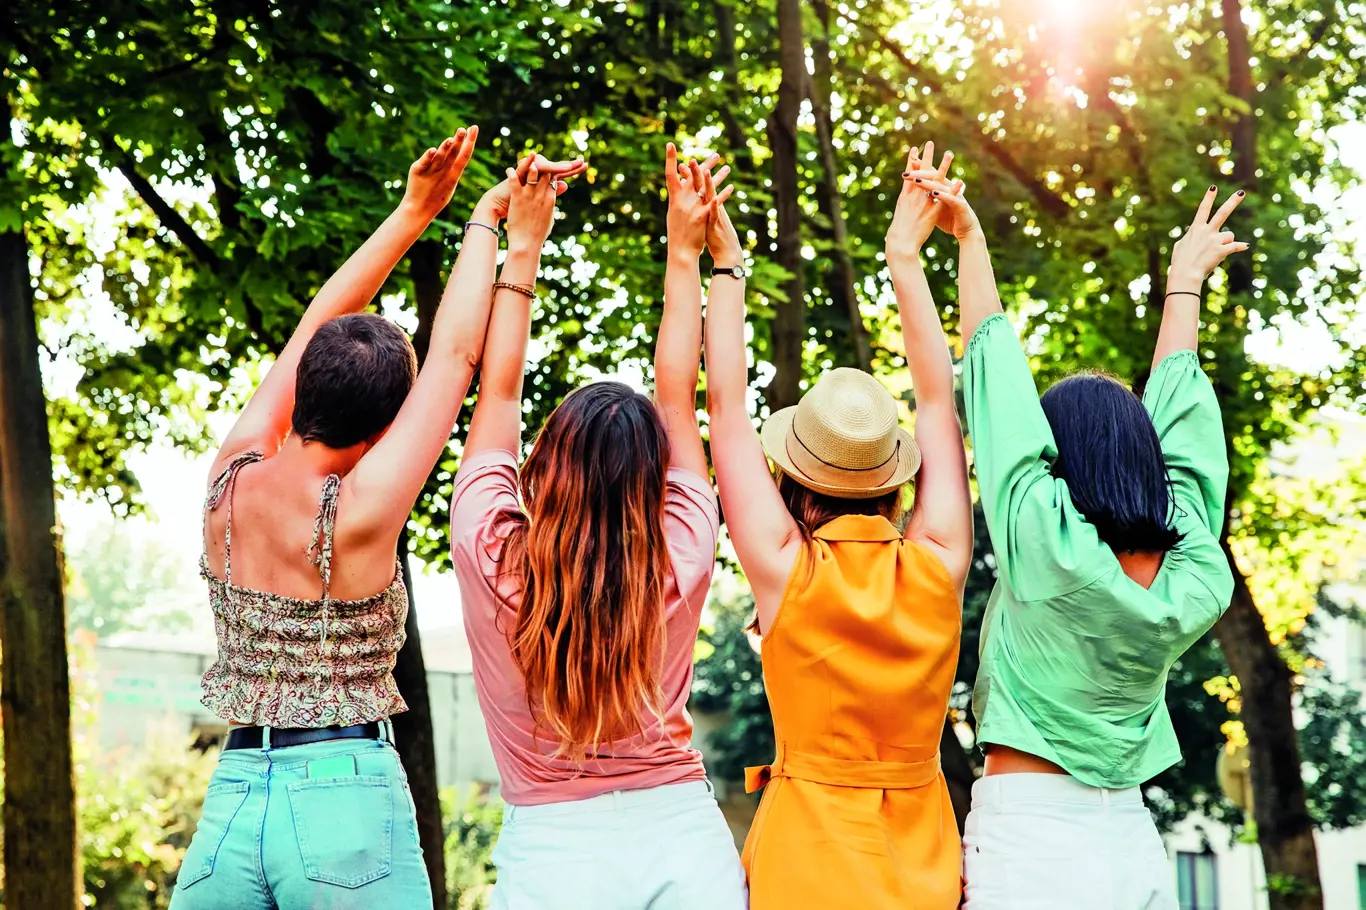 Four young teenage women friends, in a park, holding hands up in the air.